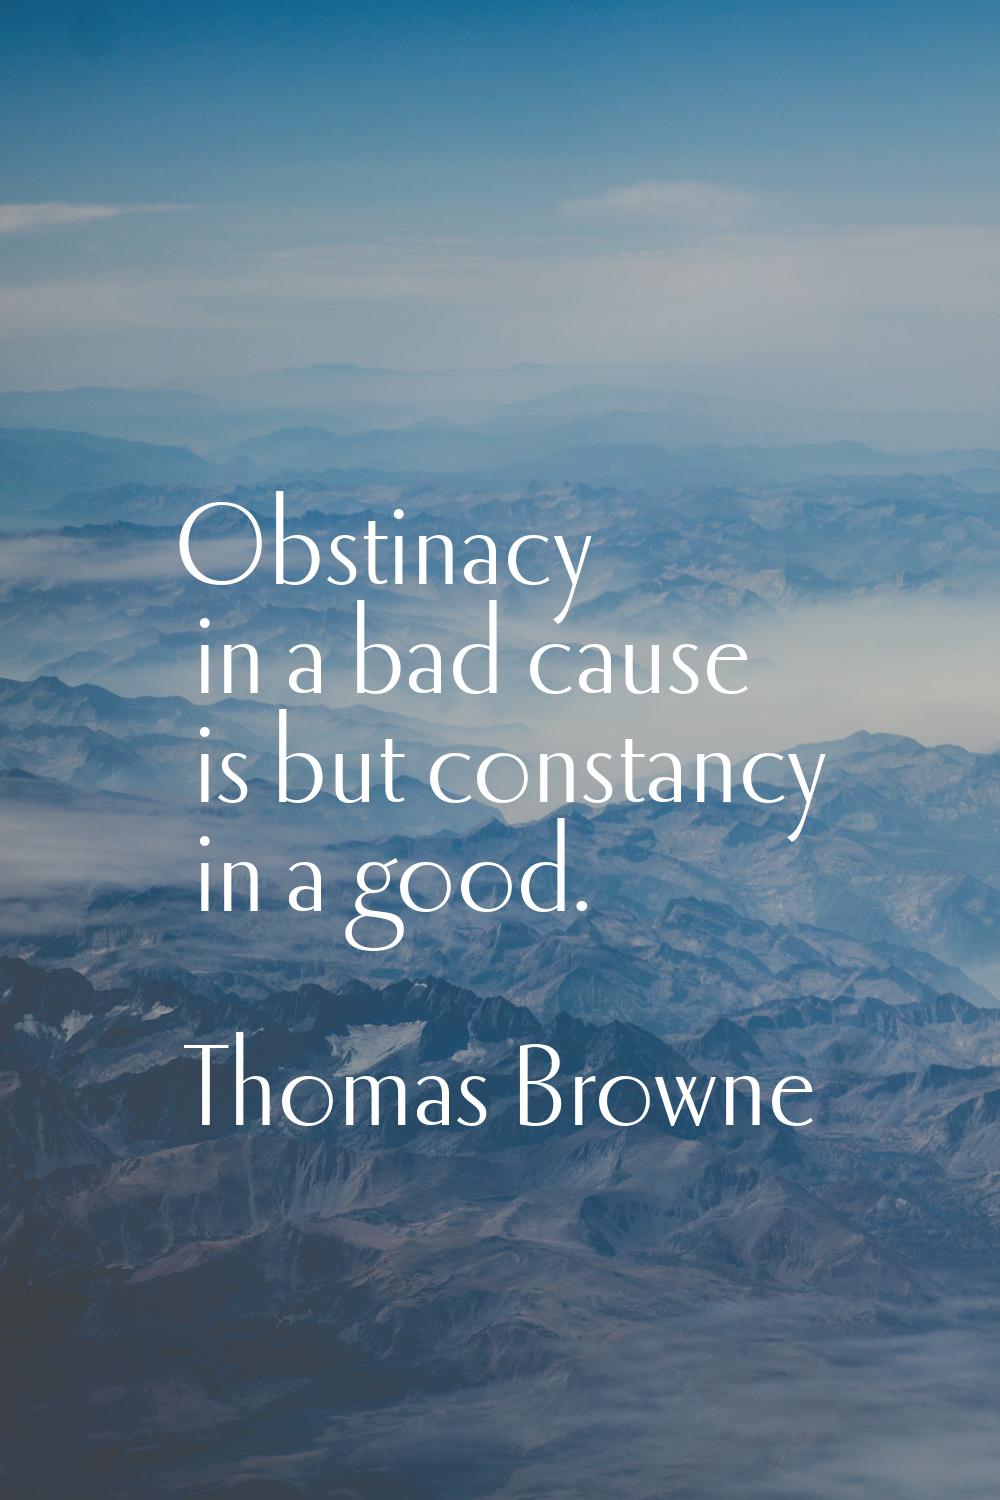 Obstinacy in a bad cause is but constancy in a good.